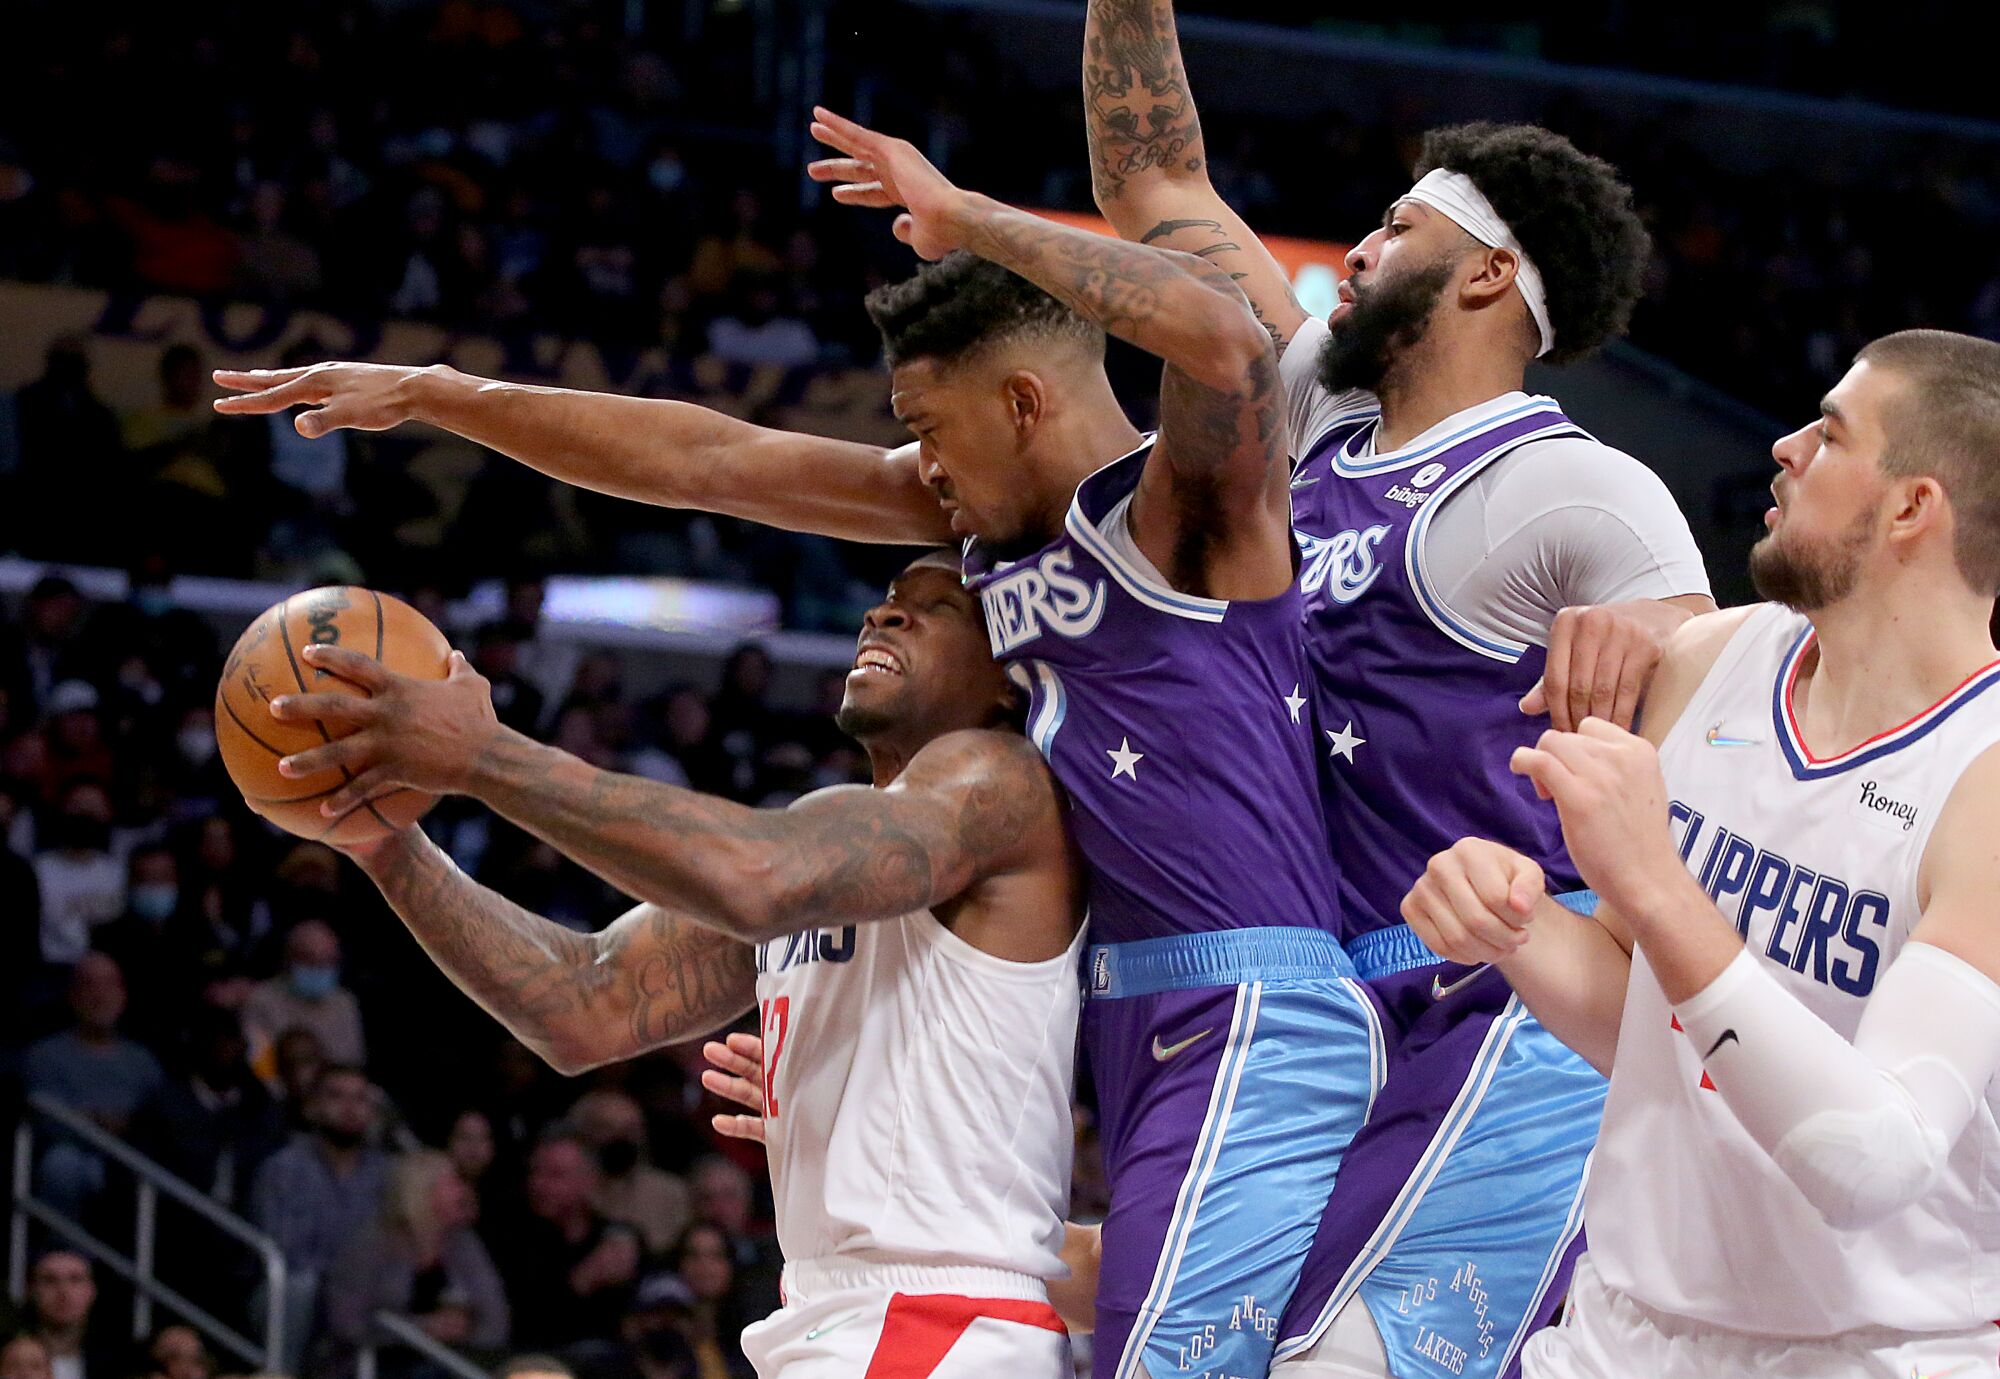  Lakers guard Eric Bledsoe is fouled by Lakers guard Malik Monk.